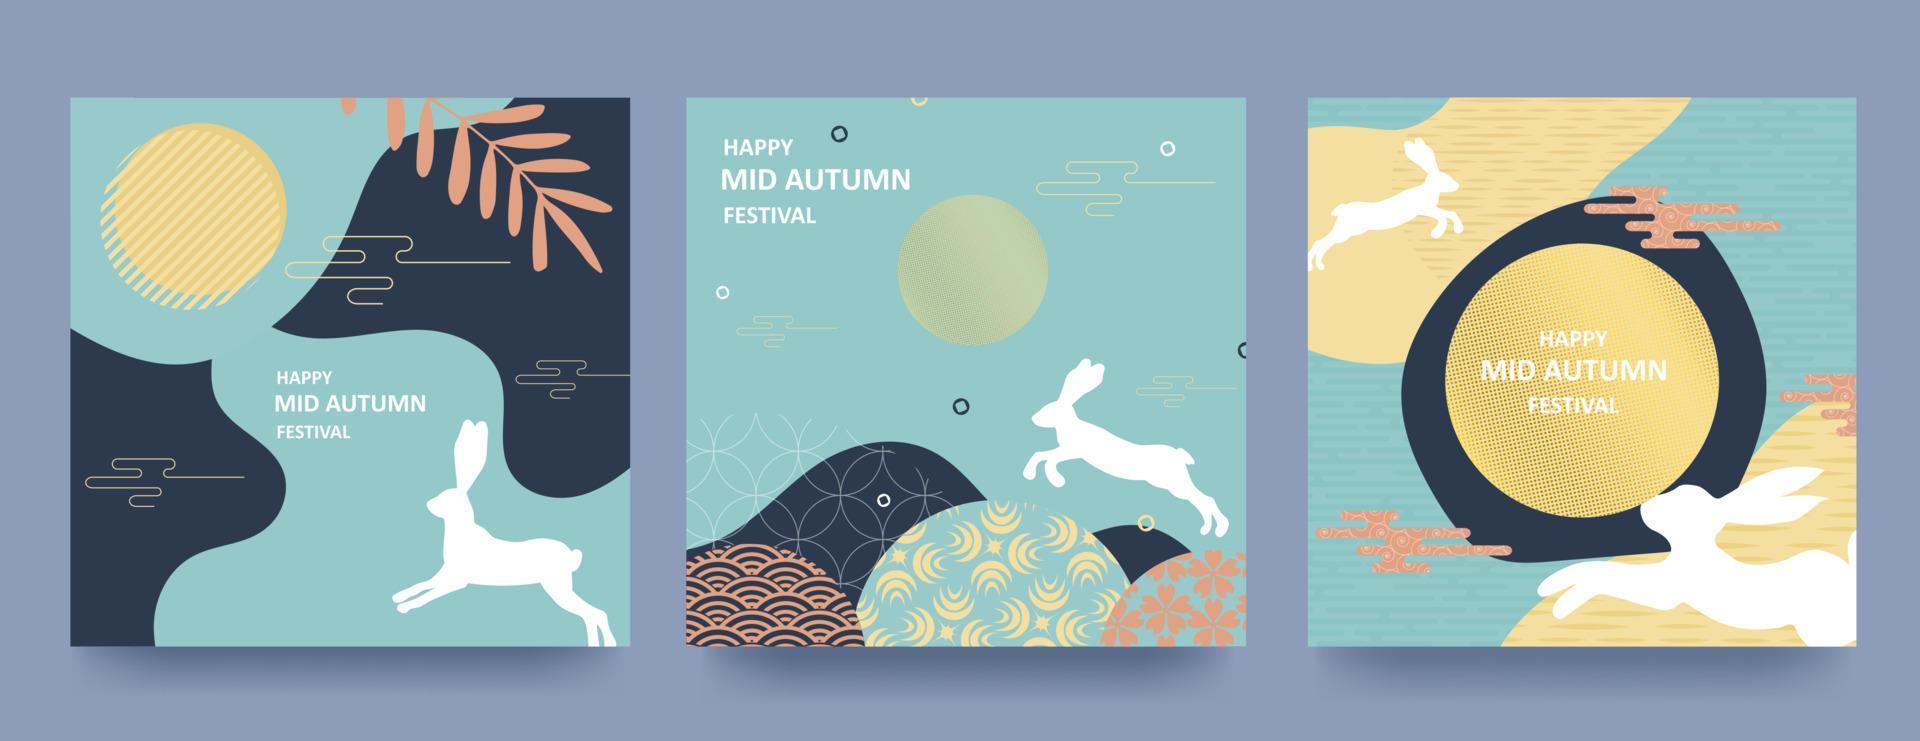 Trendy Mid Autumn Festival design Set of backgrounds, greeting cards, posters, holiday covers with moon, mooncake and cute rabbits. Chinese translation - Mid Autumn Festival. Vector illustration